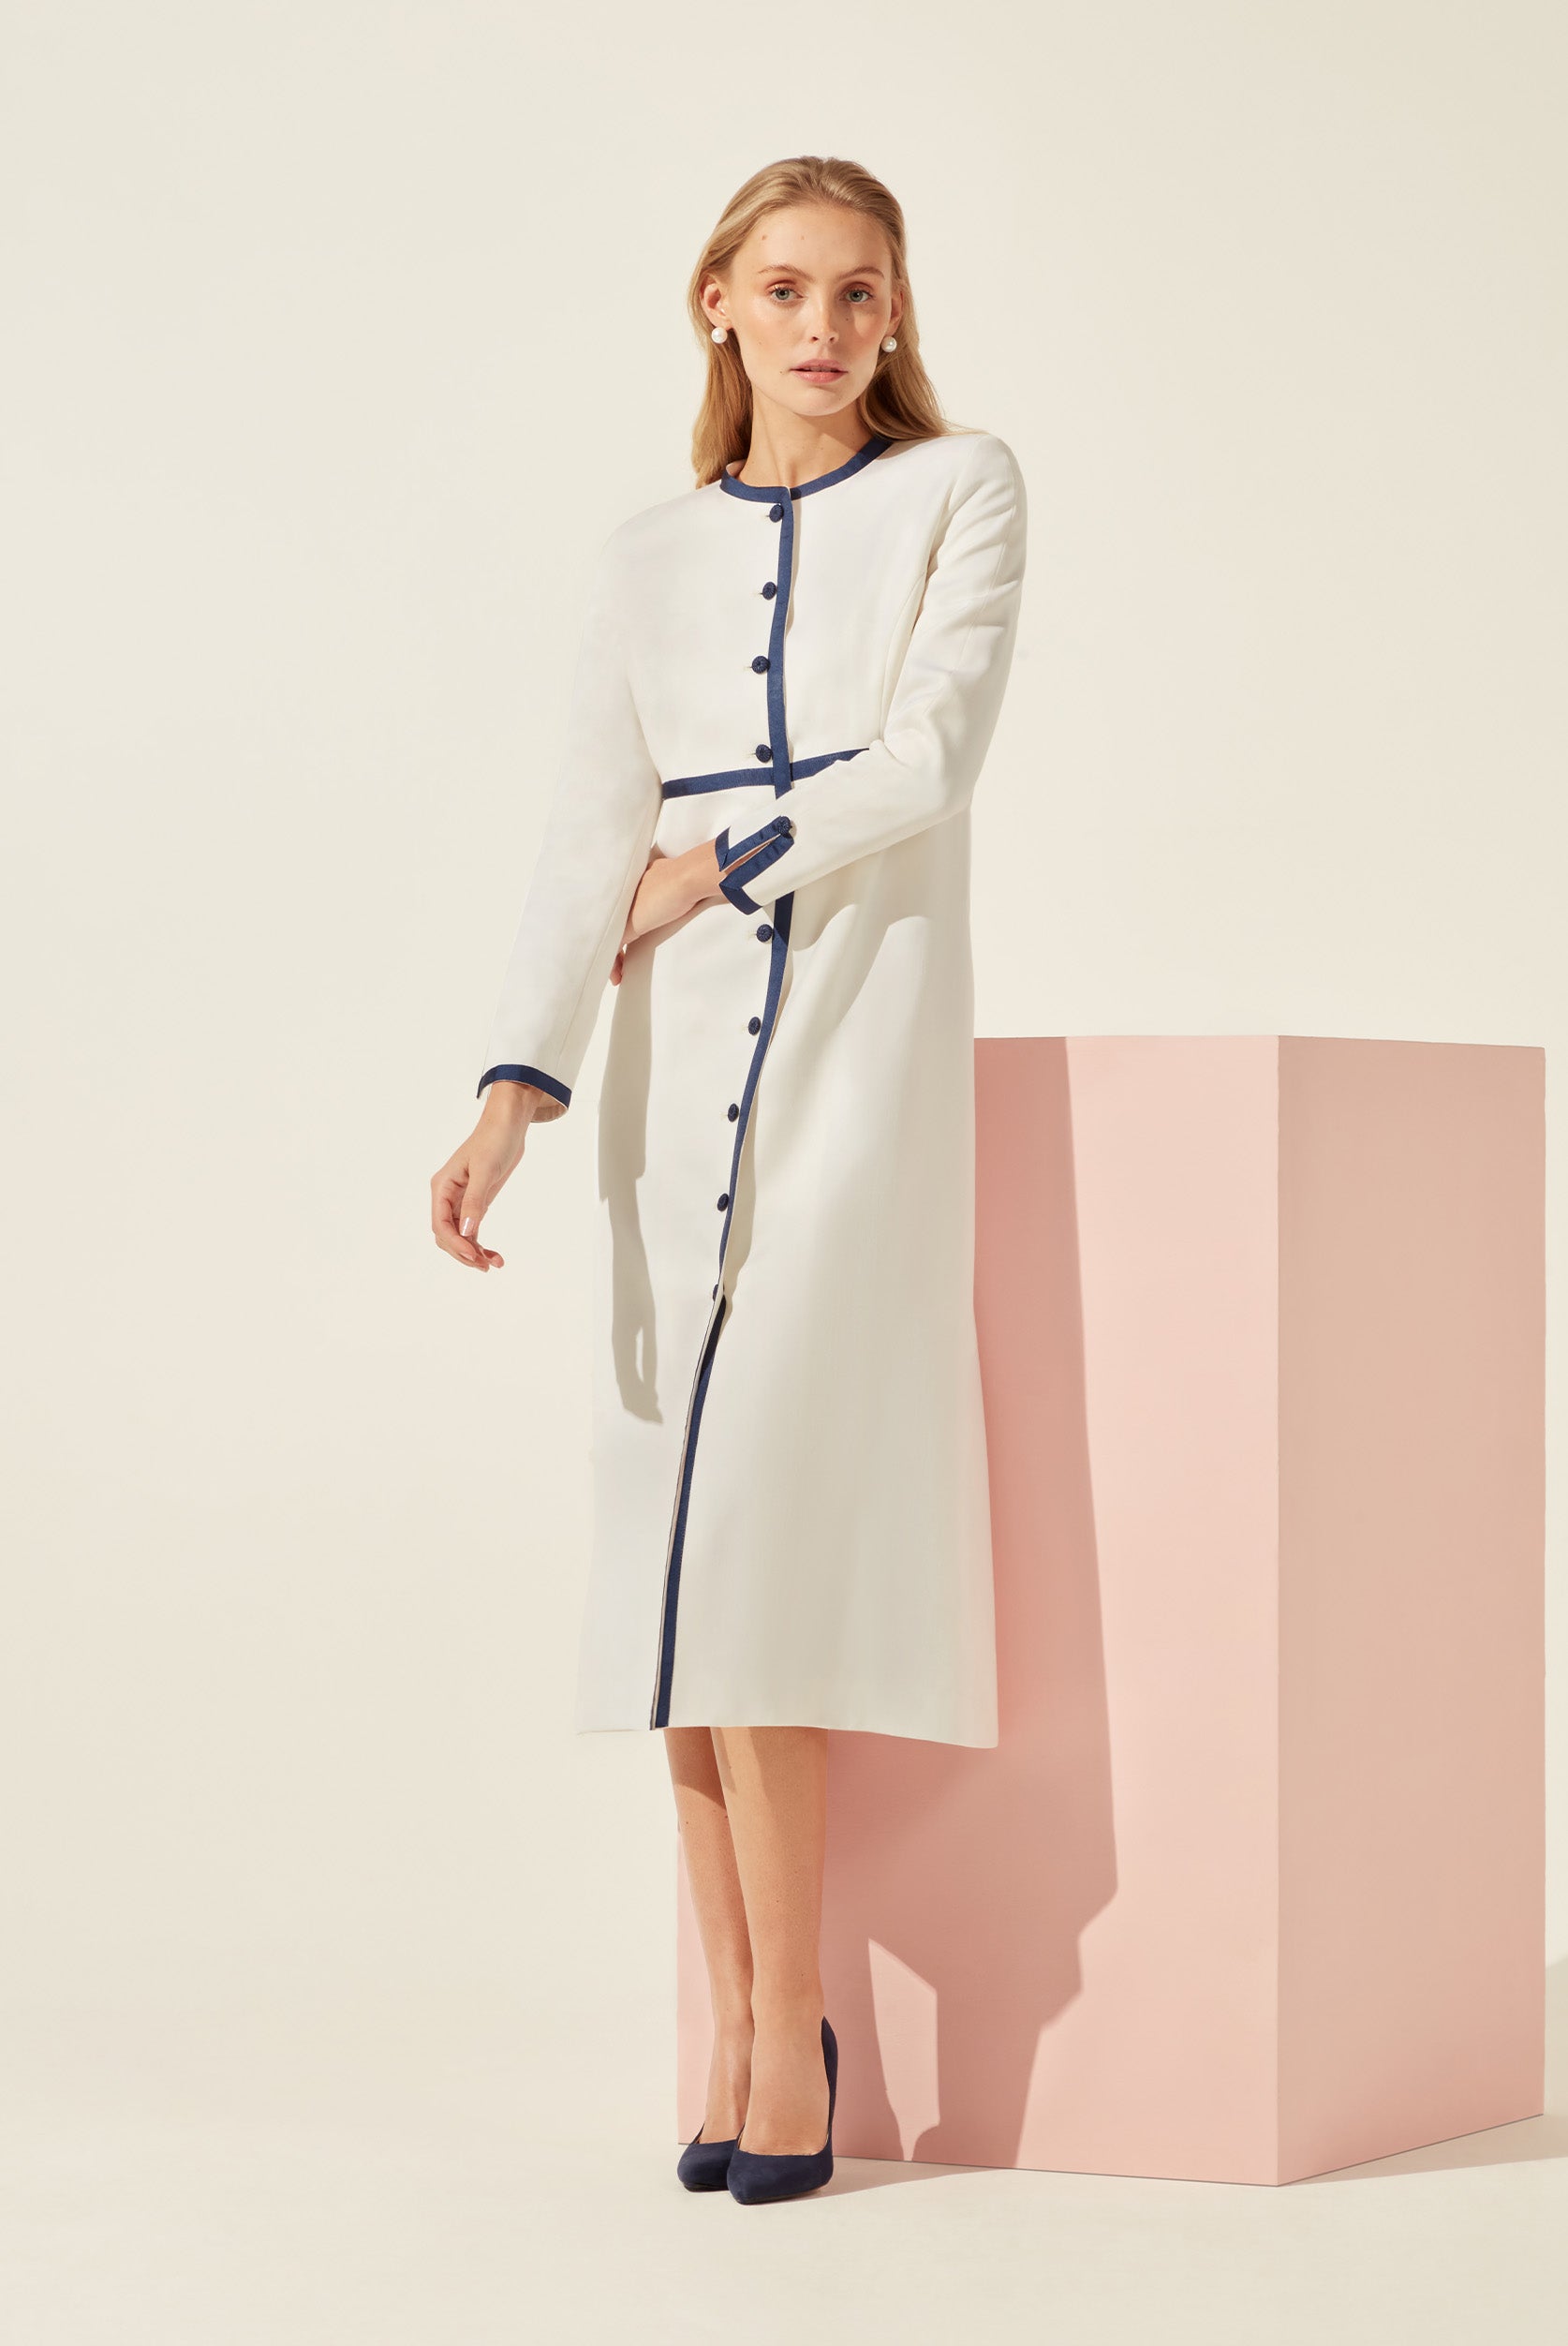 Dress Coat in Ivory with Navy Trim - Sienna